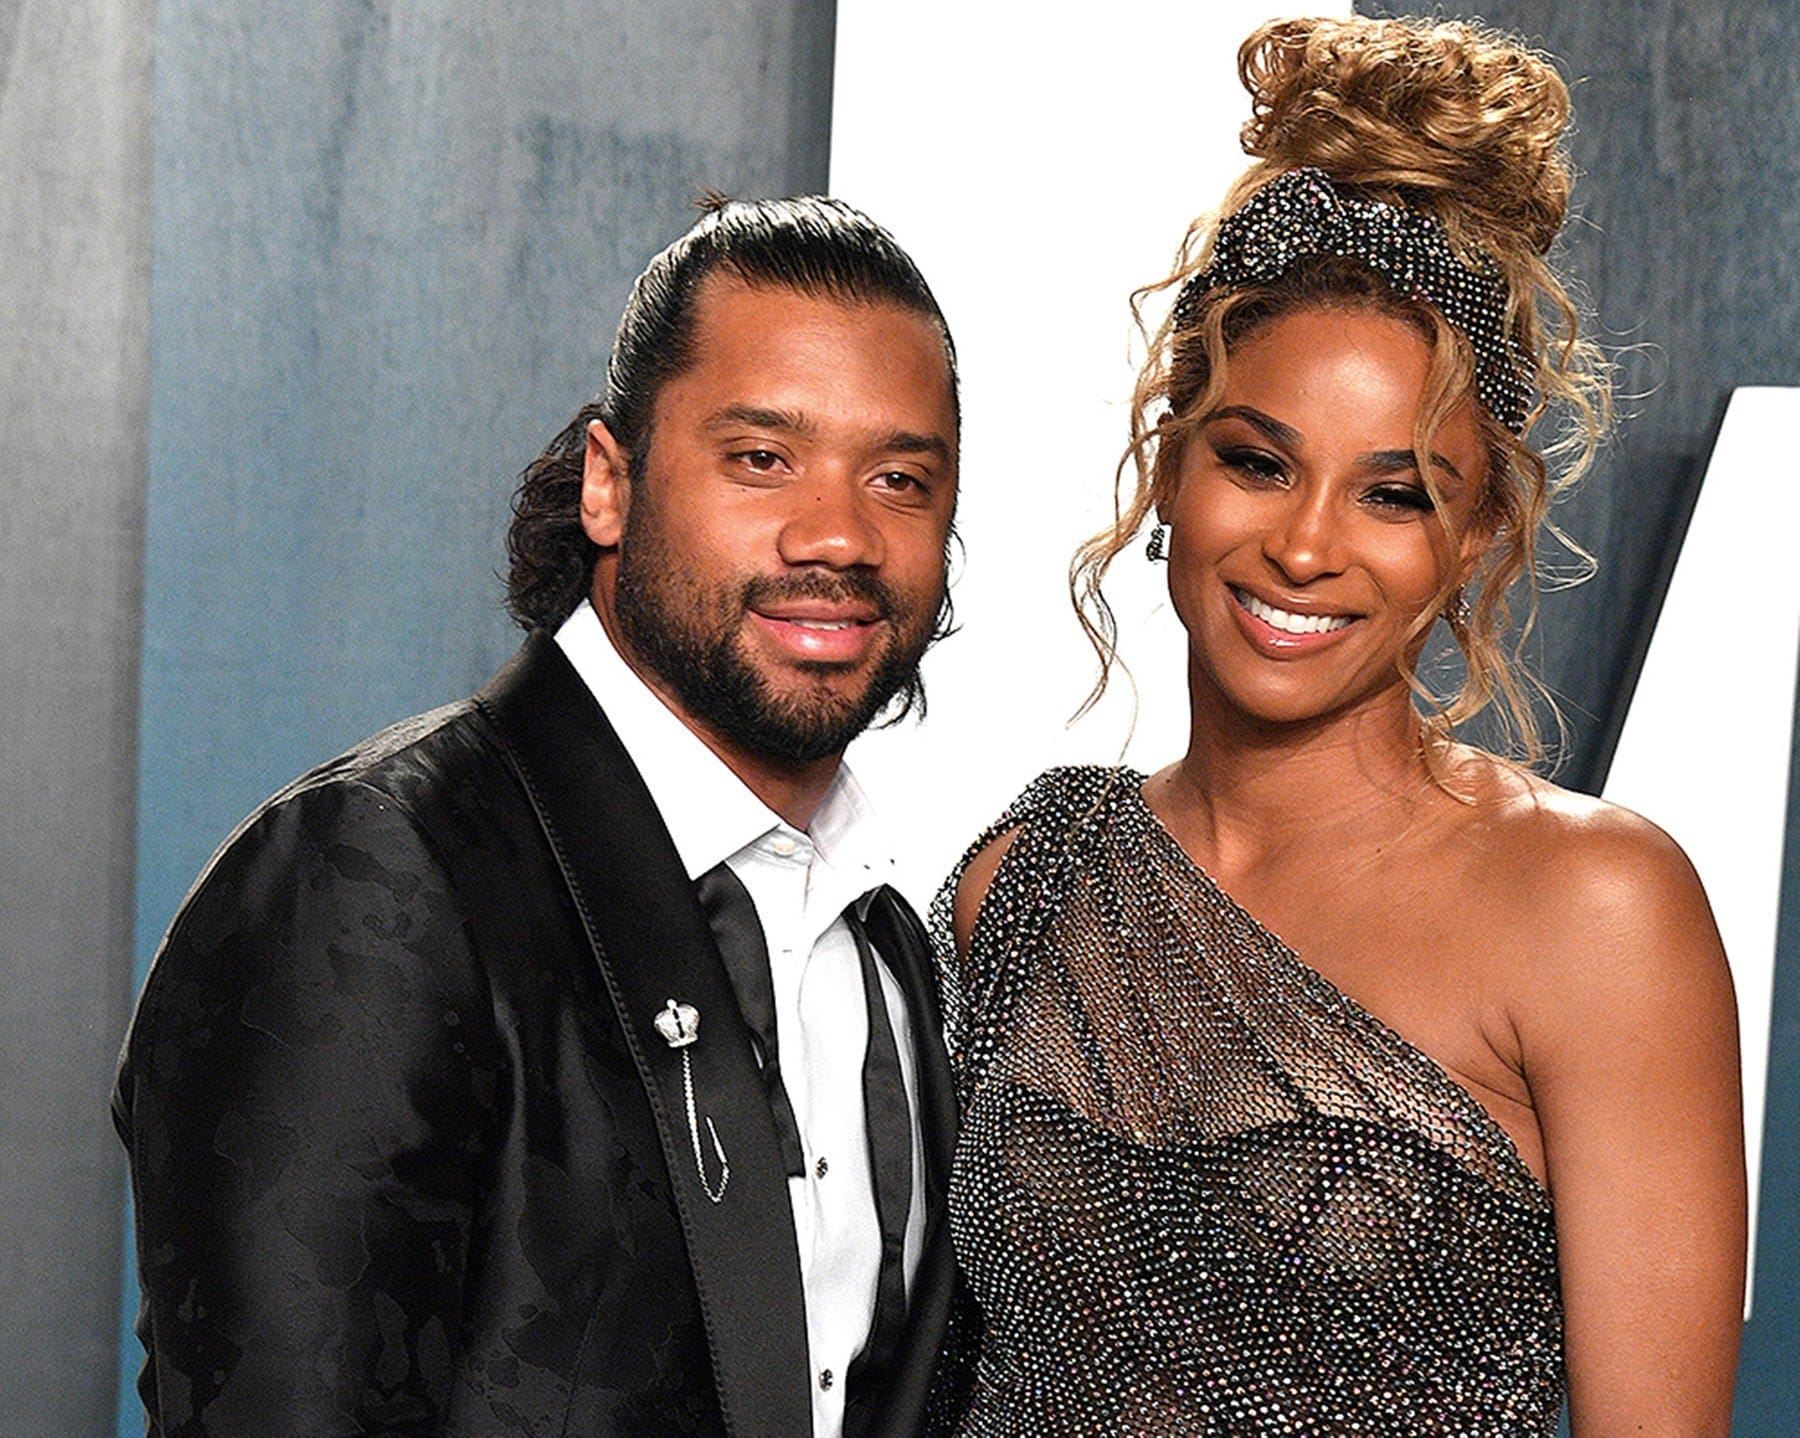 Ciara And Russell Wilson's Backyard Shocks People - Check Out Their Video